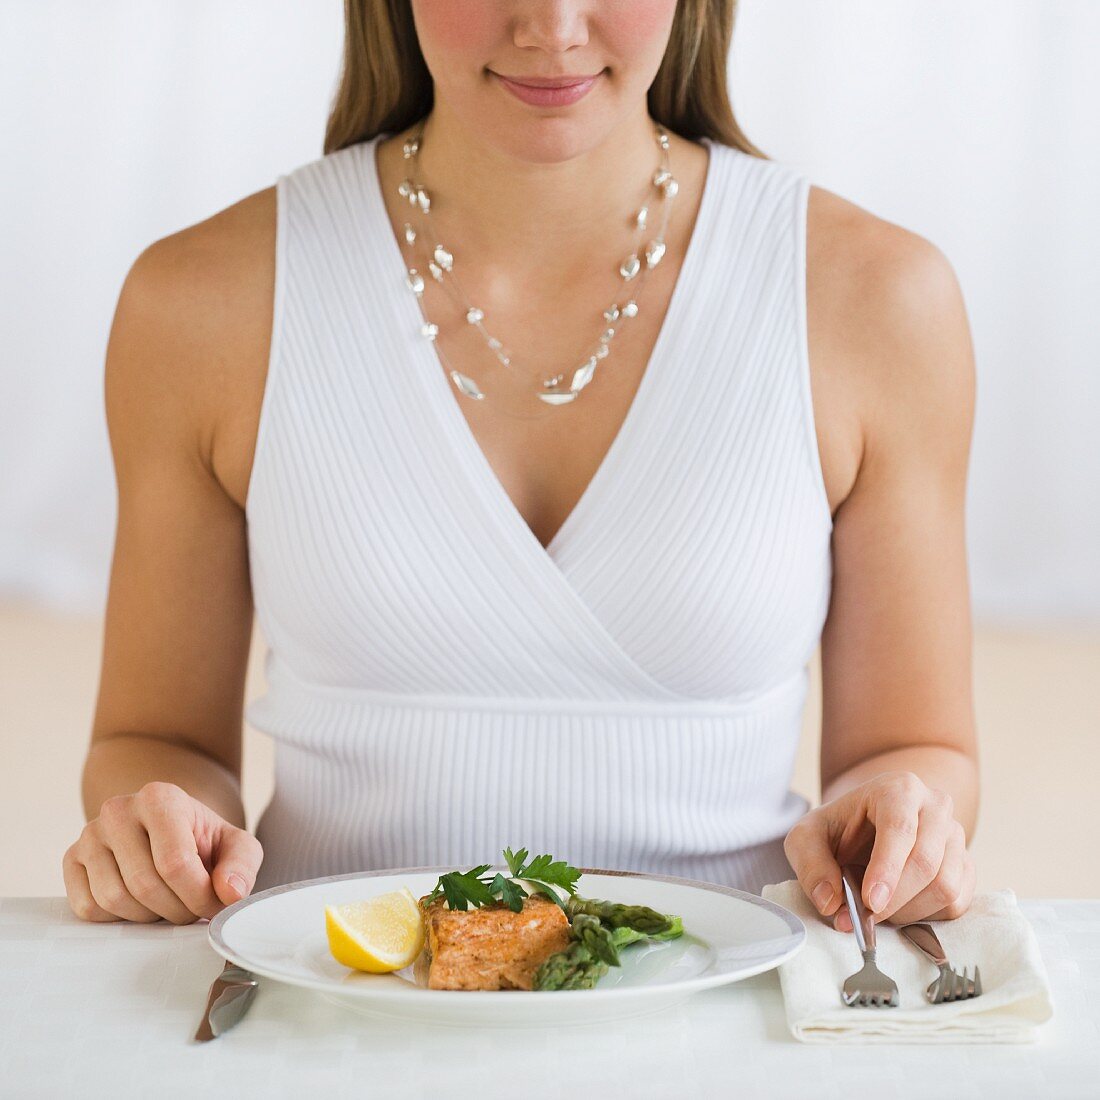 Woman sitting at dinner table